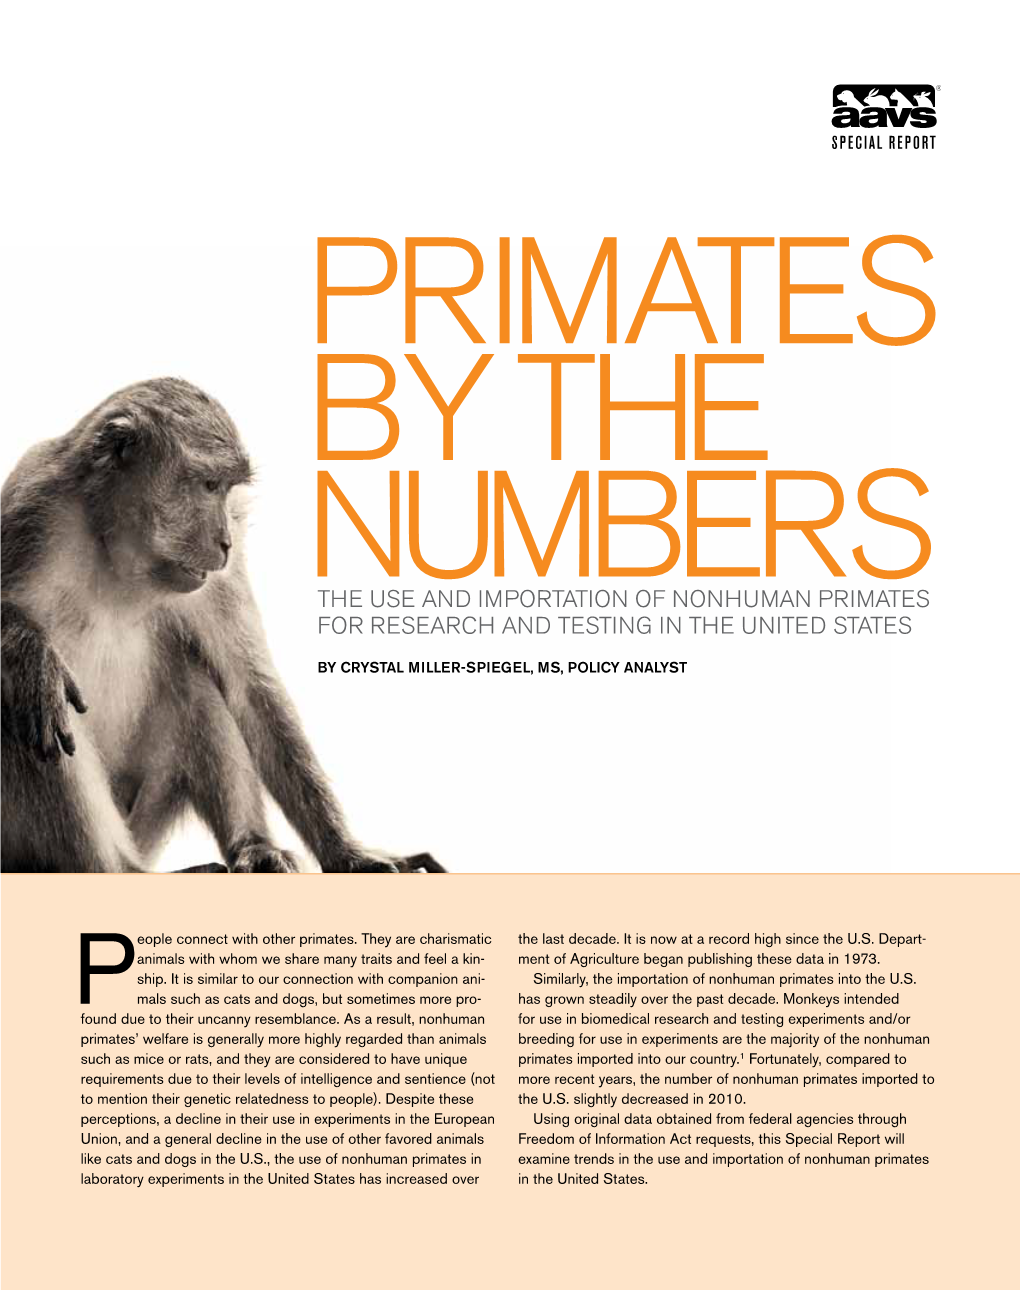 The Use and Importation of Nonhuman Primates for Research and Testing in the United States